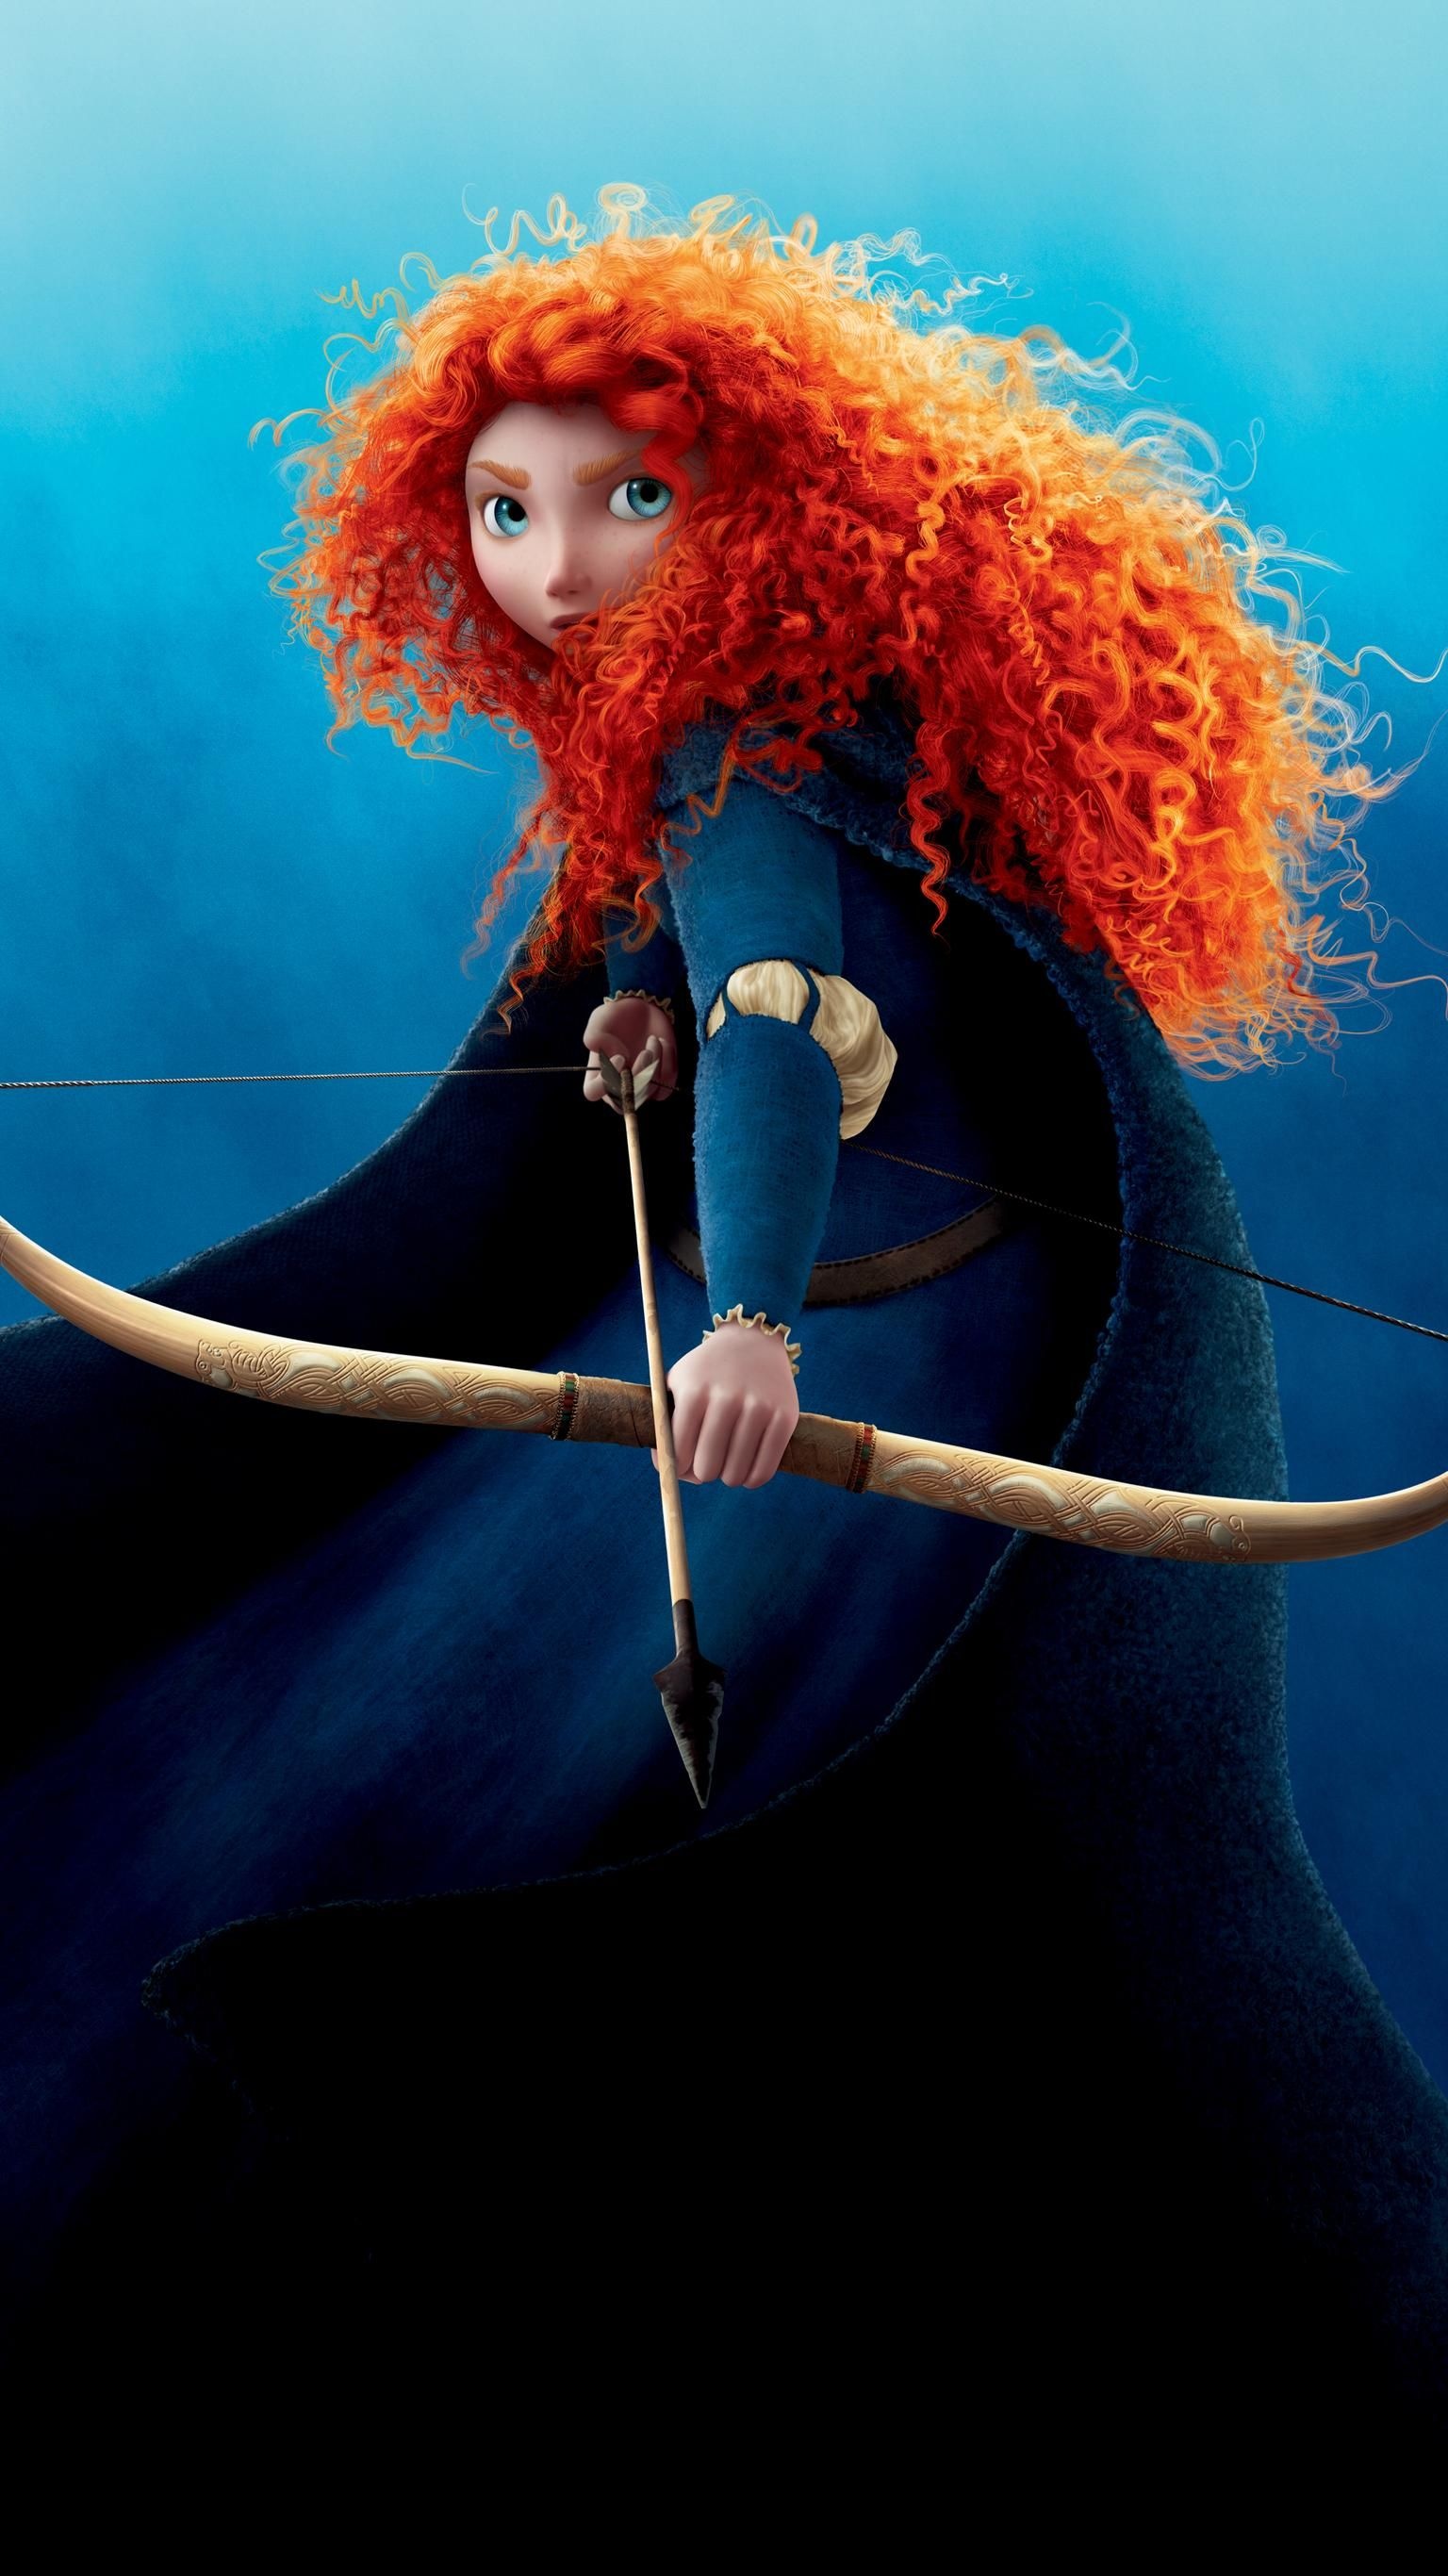 Brave (Disney): Dedicated to Pixar chairman and Apple co-founder and CEO Steve Jobs, who died before the film's release. 1540x2740 HD Wallpaper.